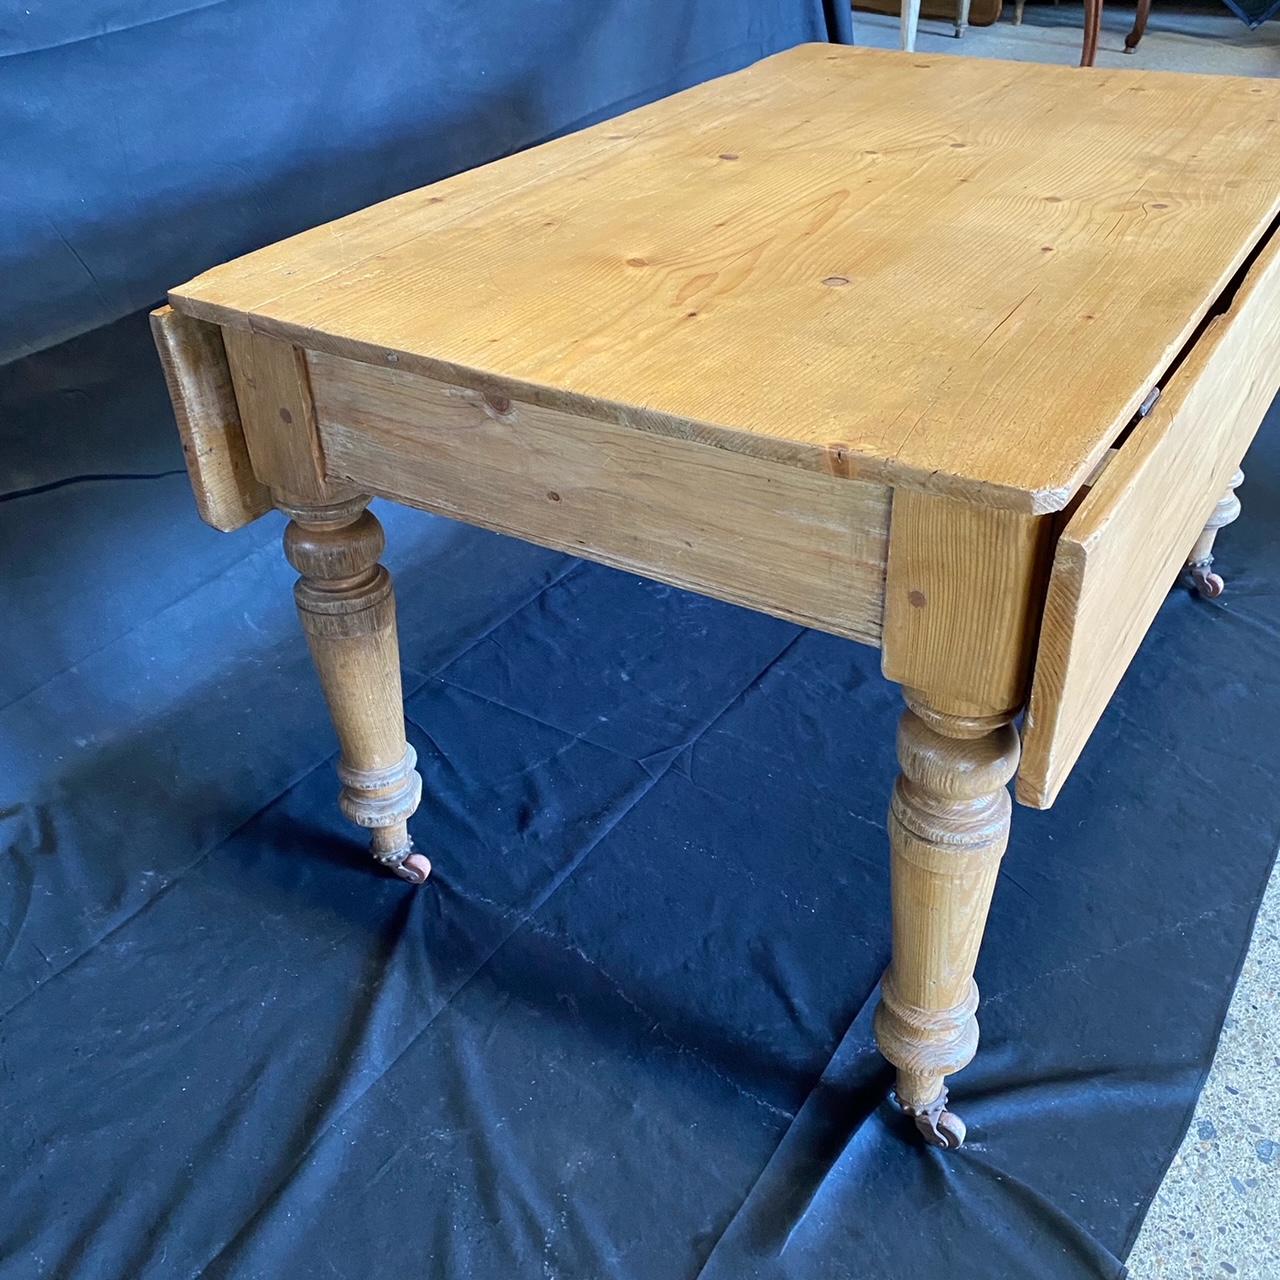 Lovely 19th century country English farmhouse dining table or harvest table with original casters, finely turned legs and drop leaves on each side. The tops are crafted thick pine boards with a lovely warm pine color and natural finish. Supported by